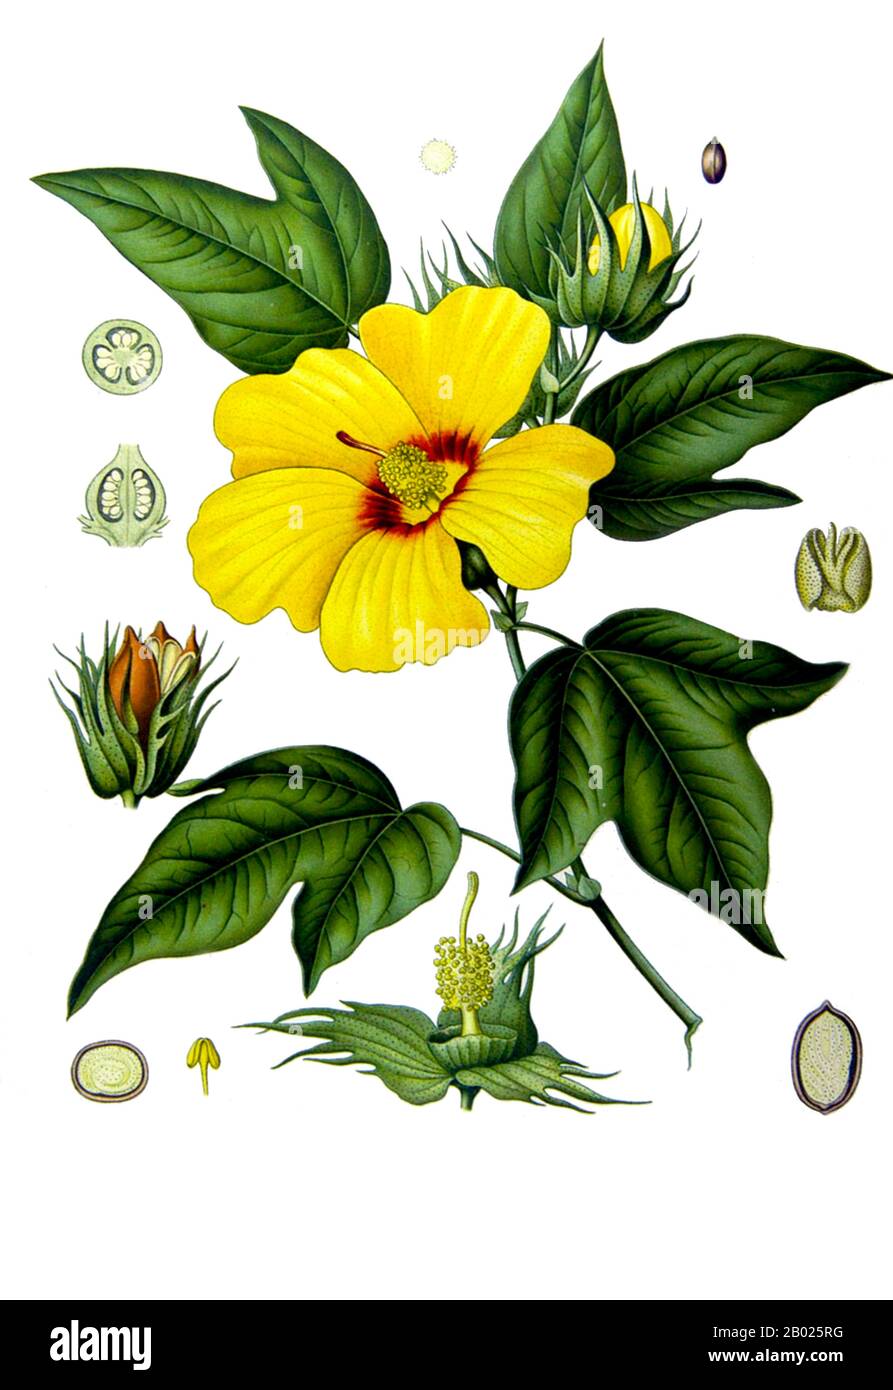 Gossypium barbadense is a species of cotton plant. Some types of cotton are American Pima, Egyptian Giza, Indian Suvin, Chinese Xinjiang, Sudanese Barakat, and Russian Tonkovoloknistyi. It is a tropical, frost-sensitive perennial plant that produces yellow flowers and has black seeds. It grows as a small, bushy tree and yields cotton with unusually long, silky fibers. To grow, it requires full sun and high humidity and rainfall. Stock Photo